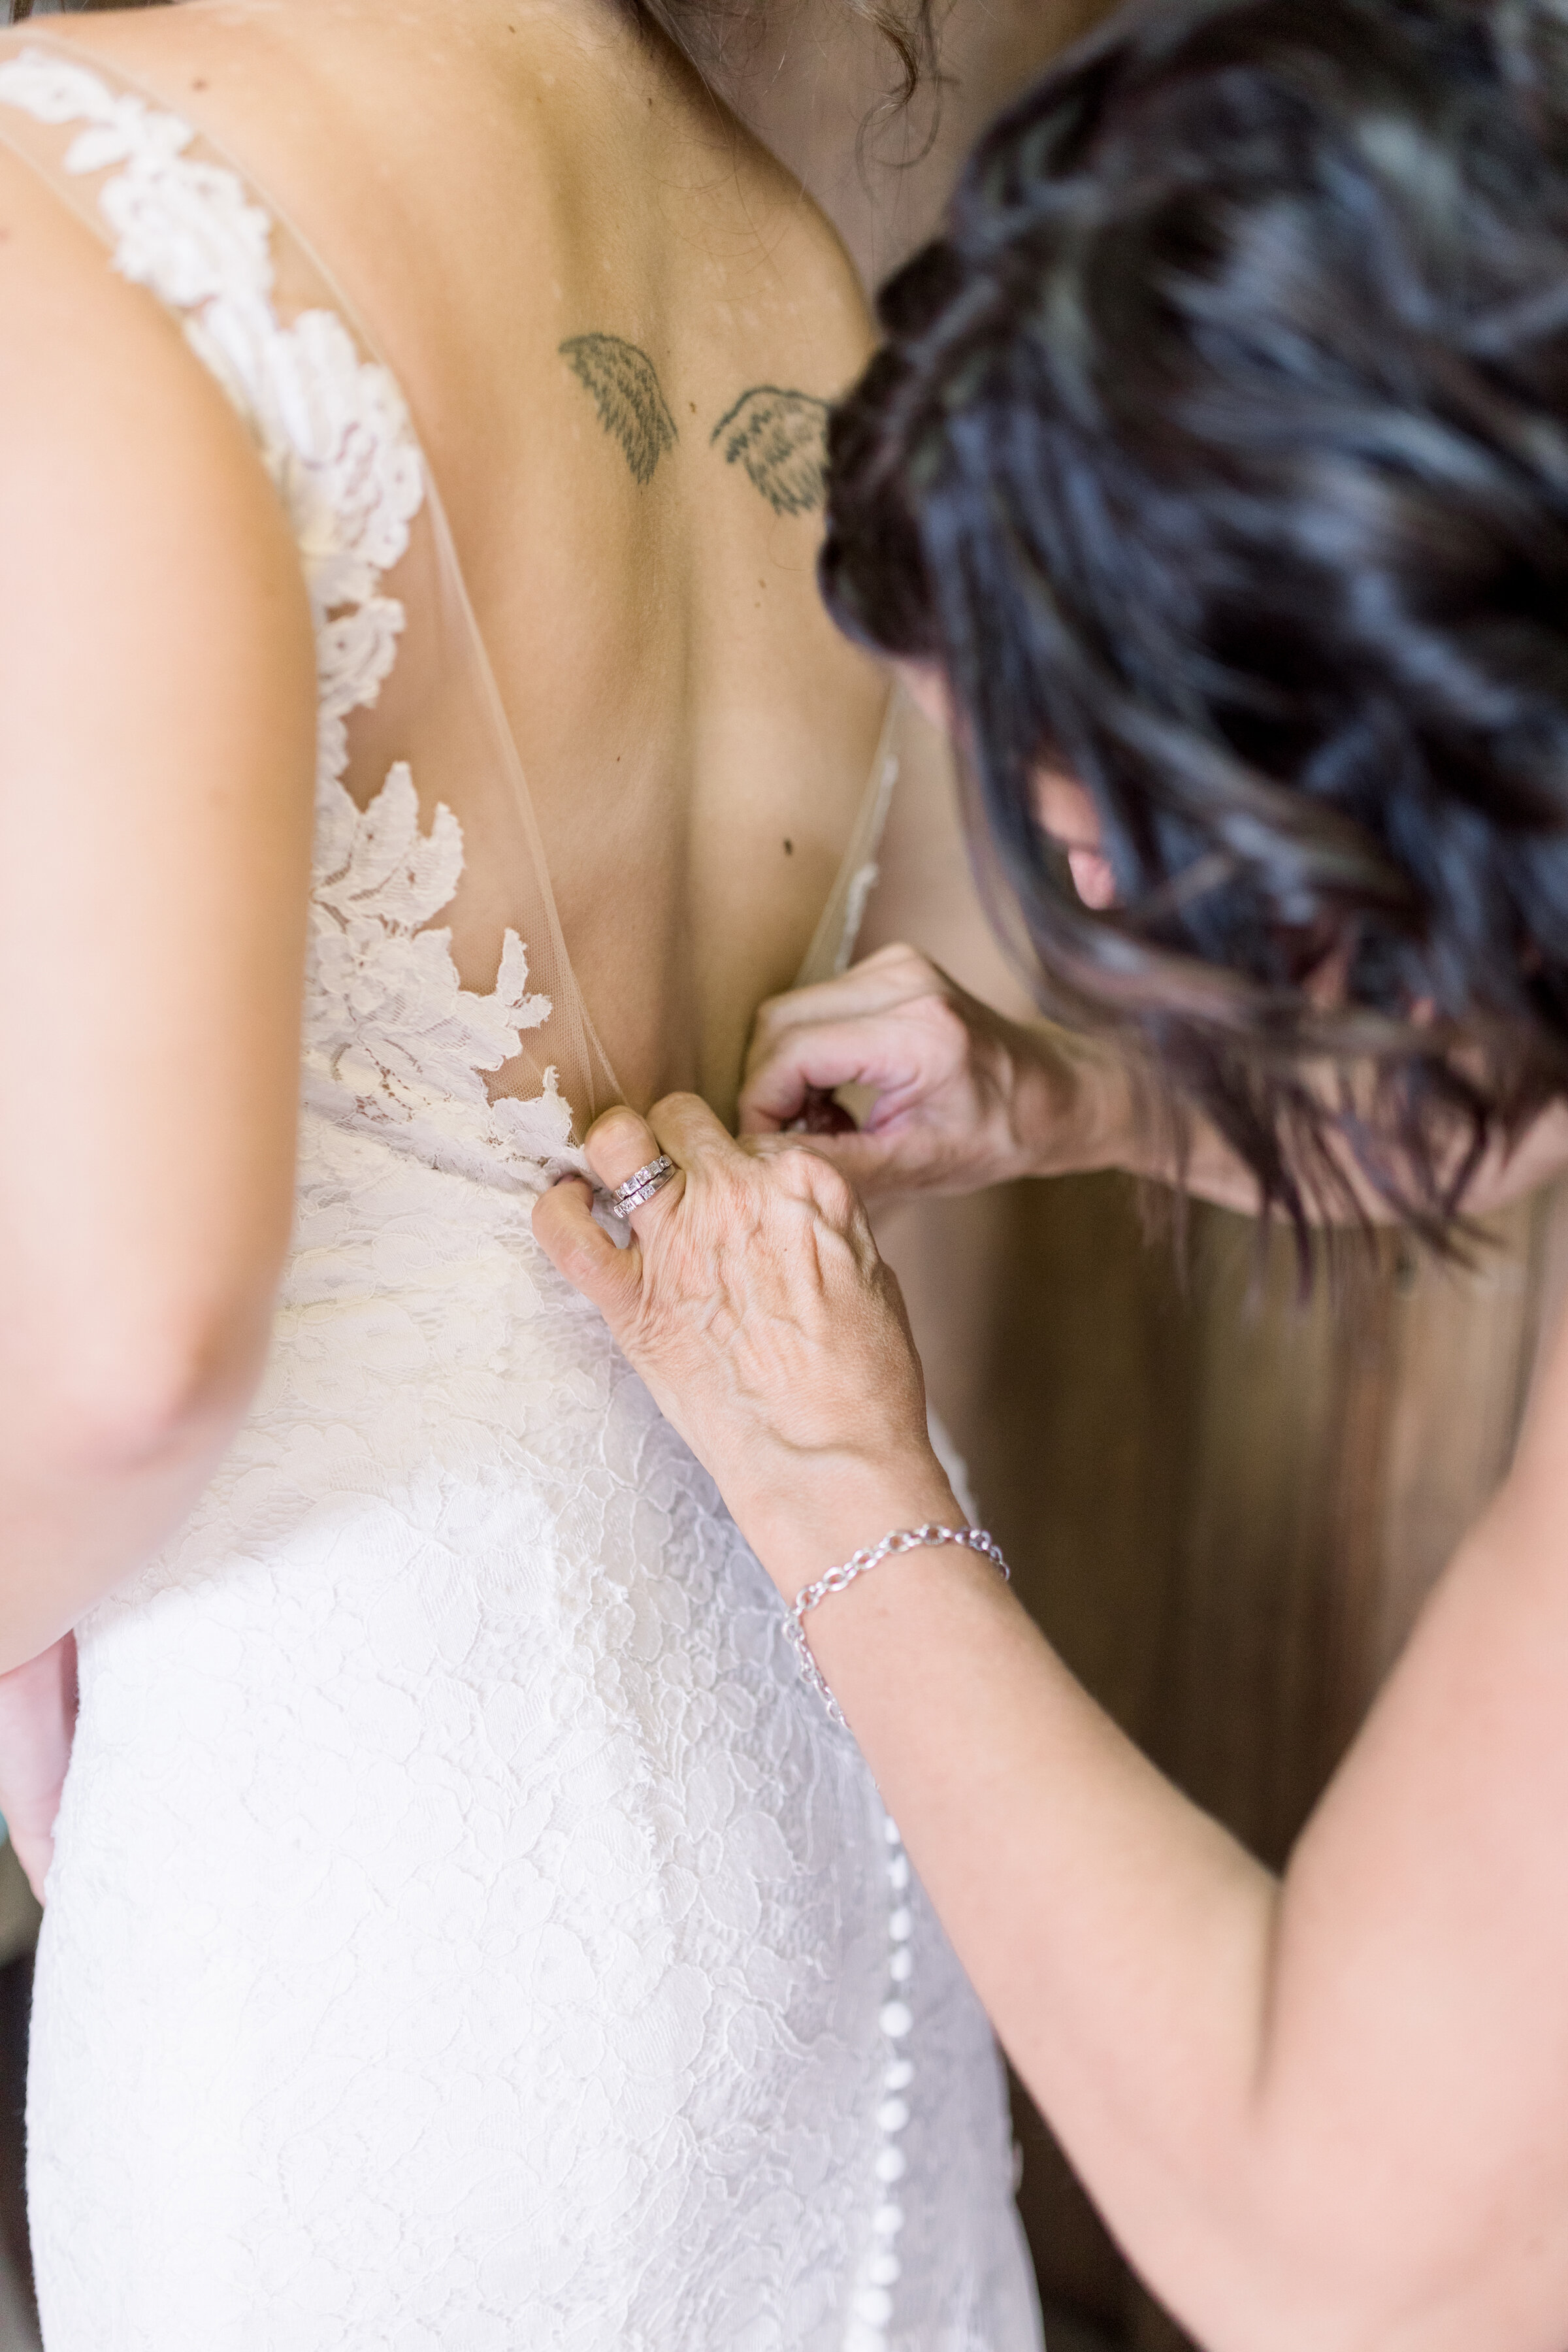  Bride with lace dress and lots of detail buttons going up the back with angel wing tattoos in Ottawa, ON by Chelsea Mason Photography. back of wedding dress backless wedding dress tattoos on wedding day angel wing tattoo brides with tattoos should i